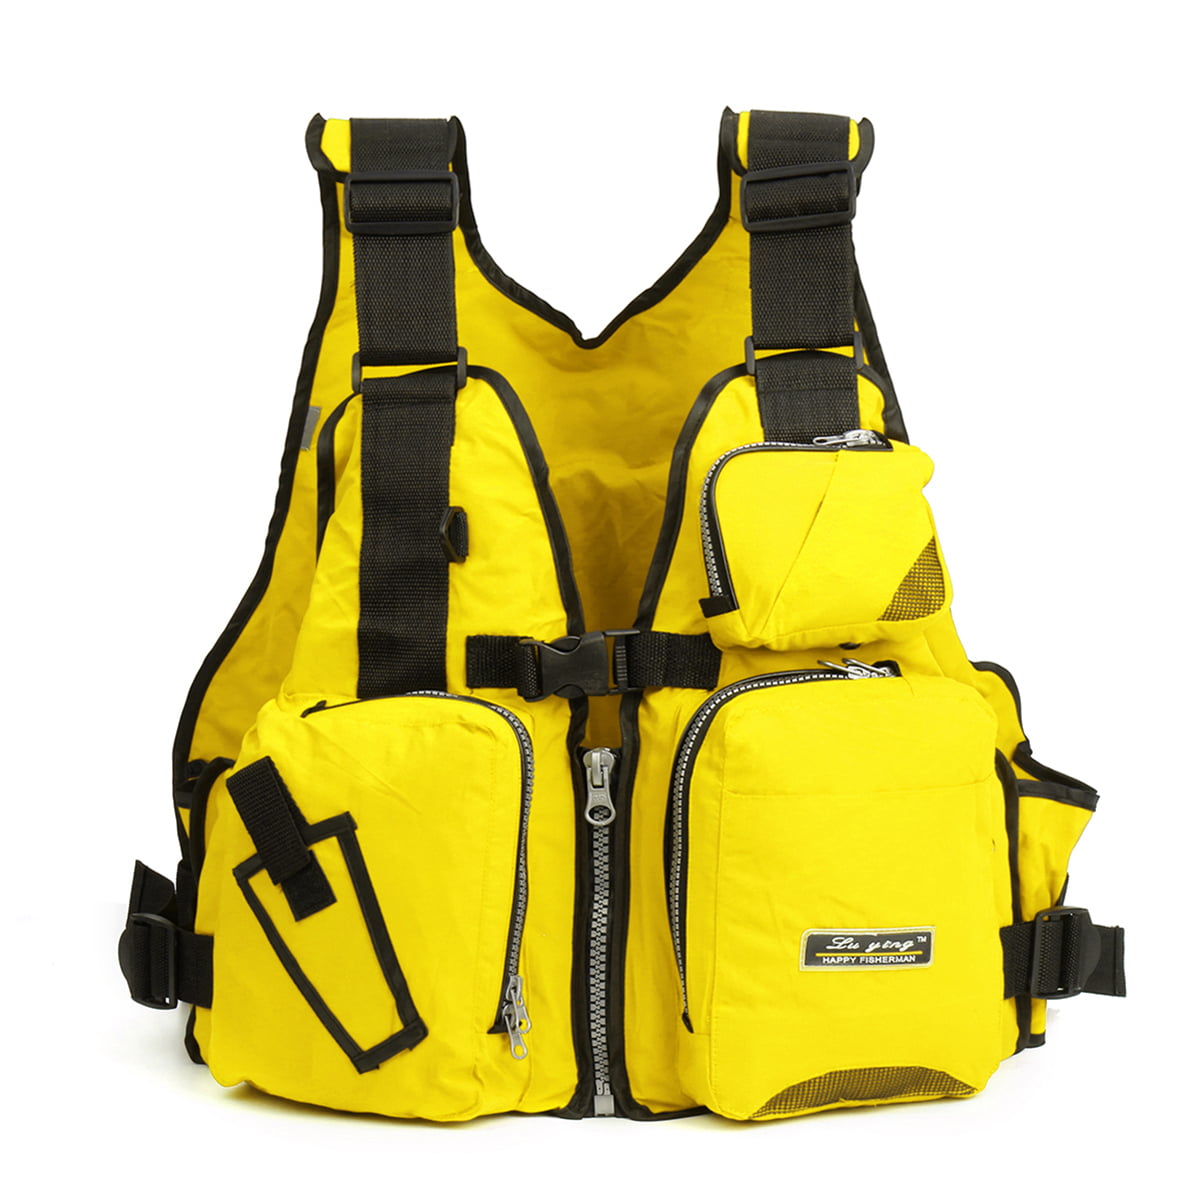 Universal Blue for sale online Stearns 354751 Adult Classic Life Vest 